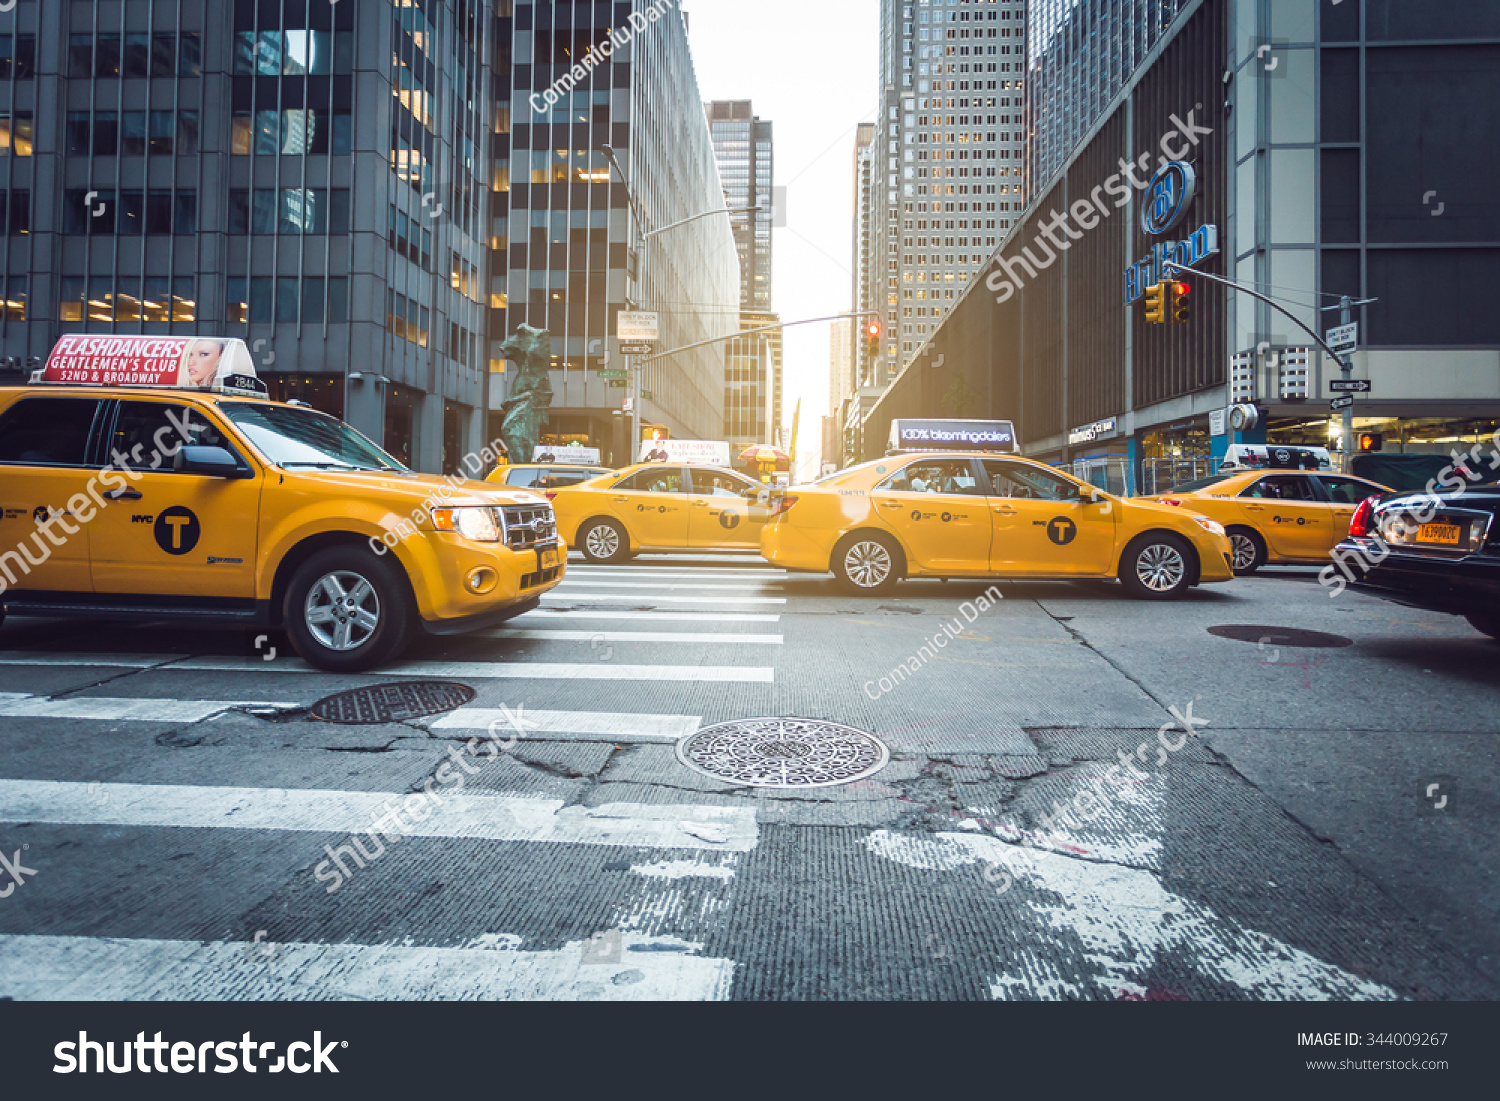 What other cities than New York use yellow cabs?